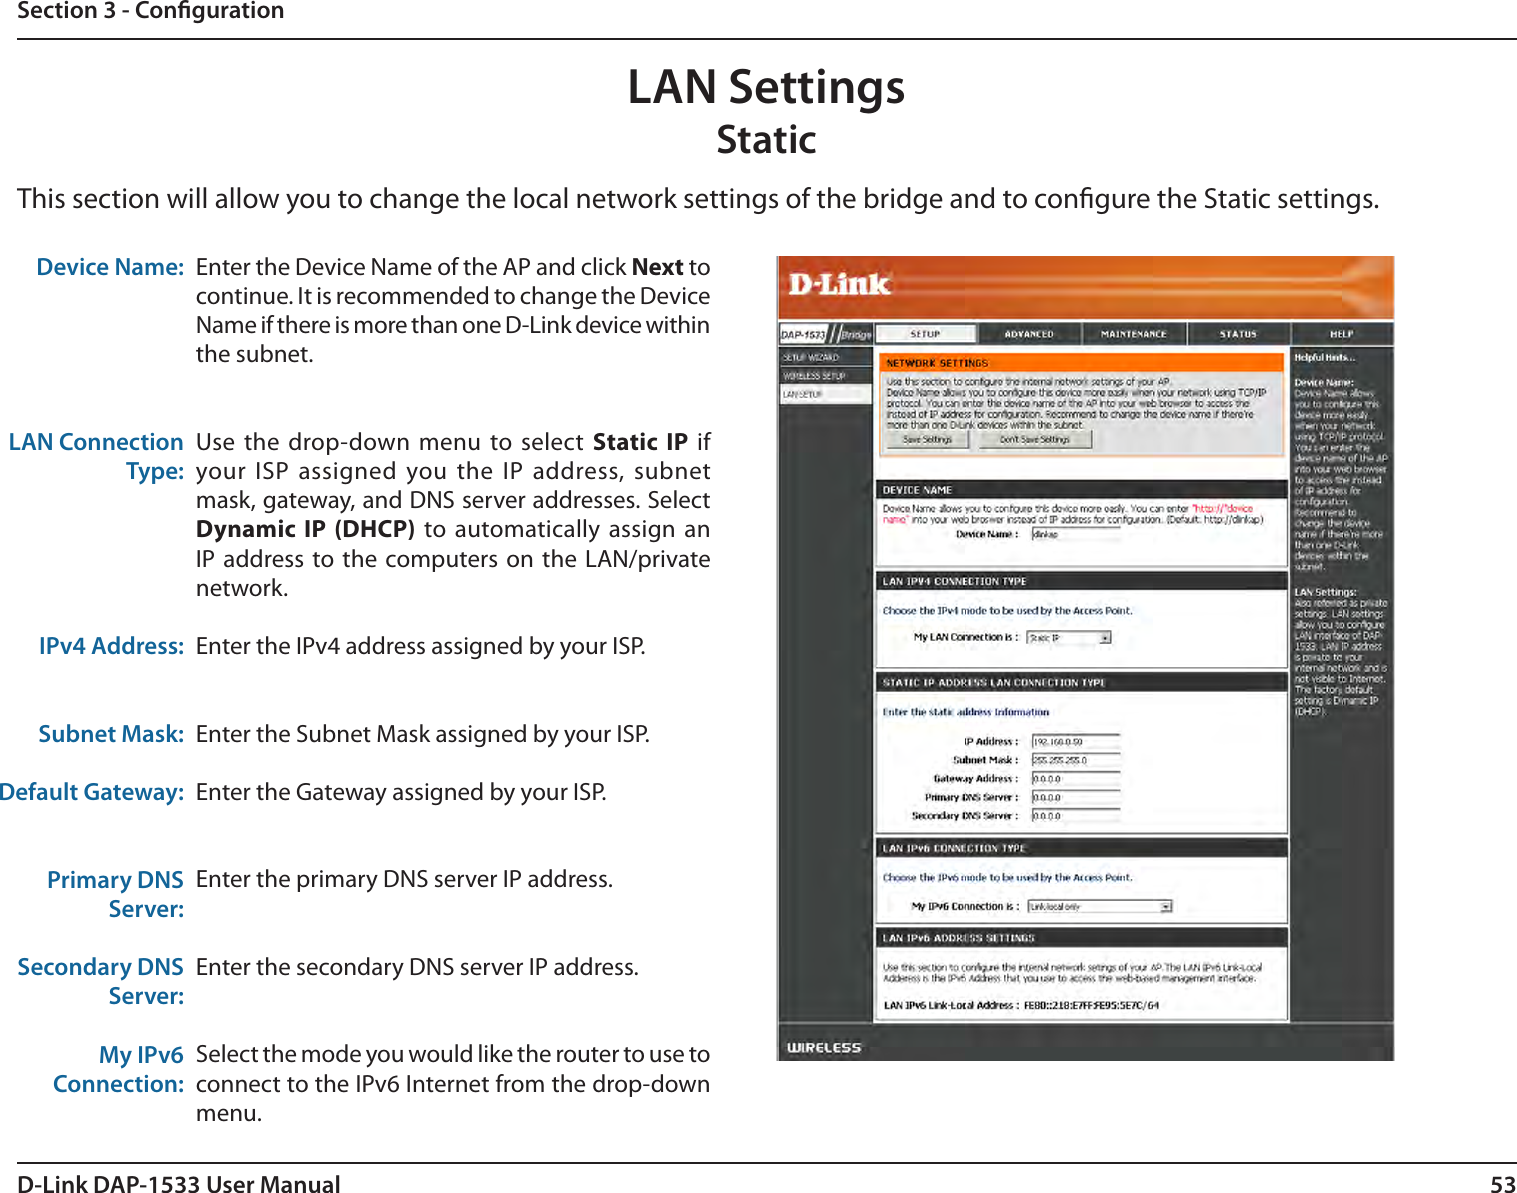 53D-Link DAP-1533 User ManualSection 3 - CongurationDevice Name:LAN Connection Type:IPv4 Address:Subnet Mask: Default Gateway:Primary DNSServer:Secondary DNSServer:My IPv6 Connection:Enter the Device Name of the AP and click Next to continue. It is recommended to change the Device Name if there is more than one D-Link device within the subnet. Use the drop-down menu to select  Static IP  if your ISP assigned you the IP address, subnet mask, gateway, and DNS server addresses. Select Dynamic IP (DHCP)  to automatically assign an IP address to the computers on the LAN/private network.Enter the IPv4 address assigned by your ISP.Enter the Subnet Mask assigned by your ISP.Enter the Gateway assigned by your ISP.Enter the primary DNS server IP address.Enter the secondary DNS server IP address.Select the mode you would like the router to use to connect to the IPv6 Internet from the drop-down menu. This section will allow you to change the local network settings of the bridge and to congure the Static settings.LAN SettingsStatic